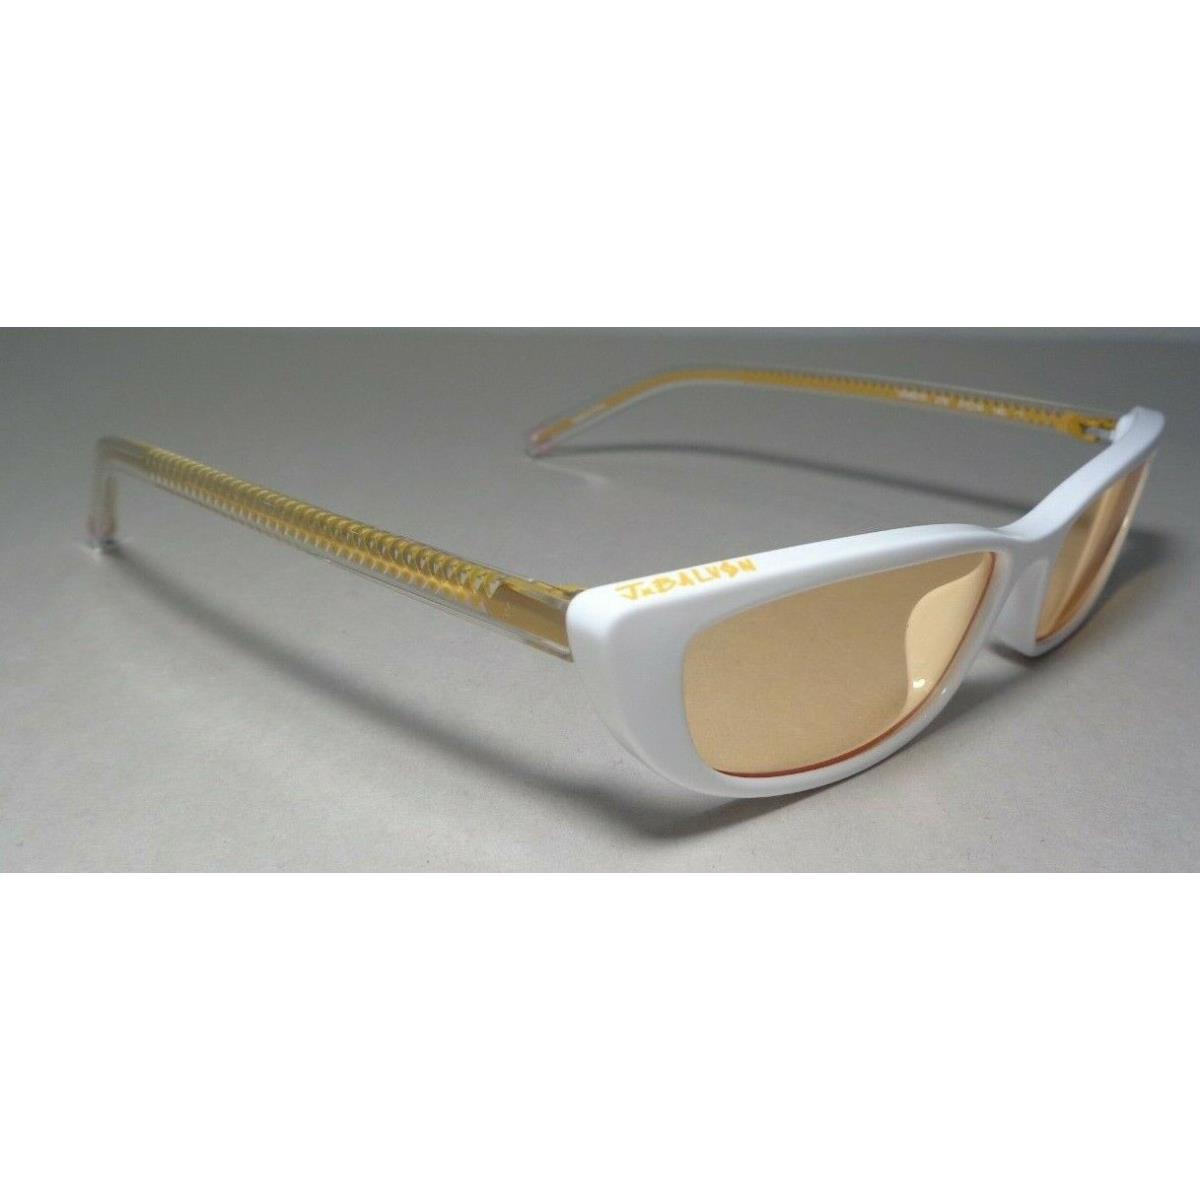 Guess sunglasses  - Frame: White 5